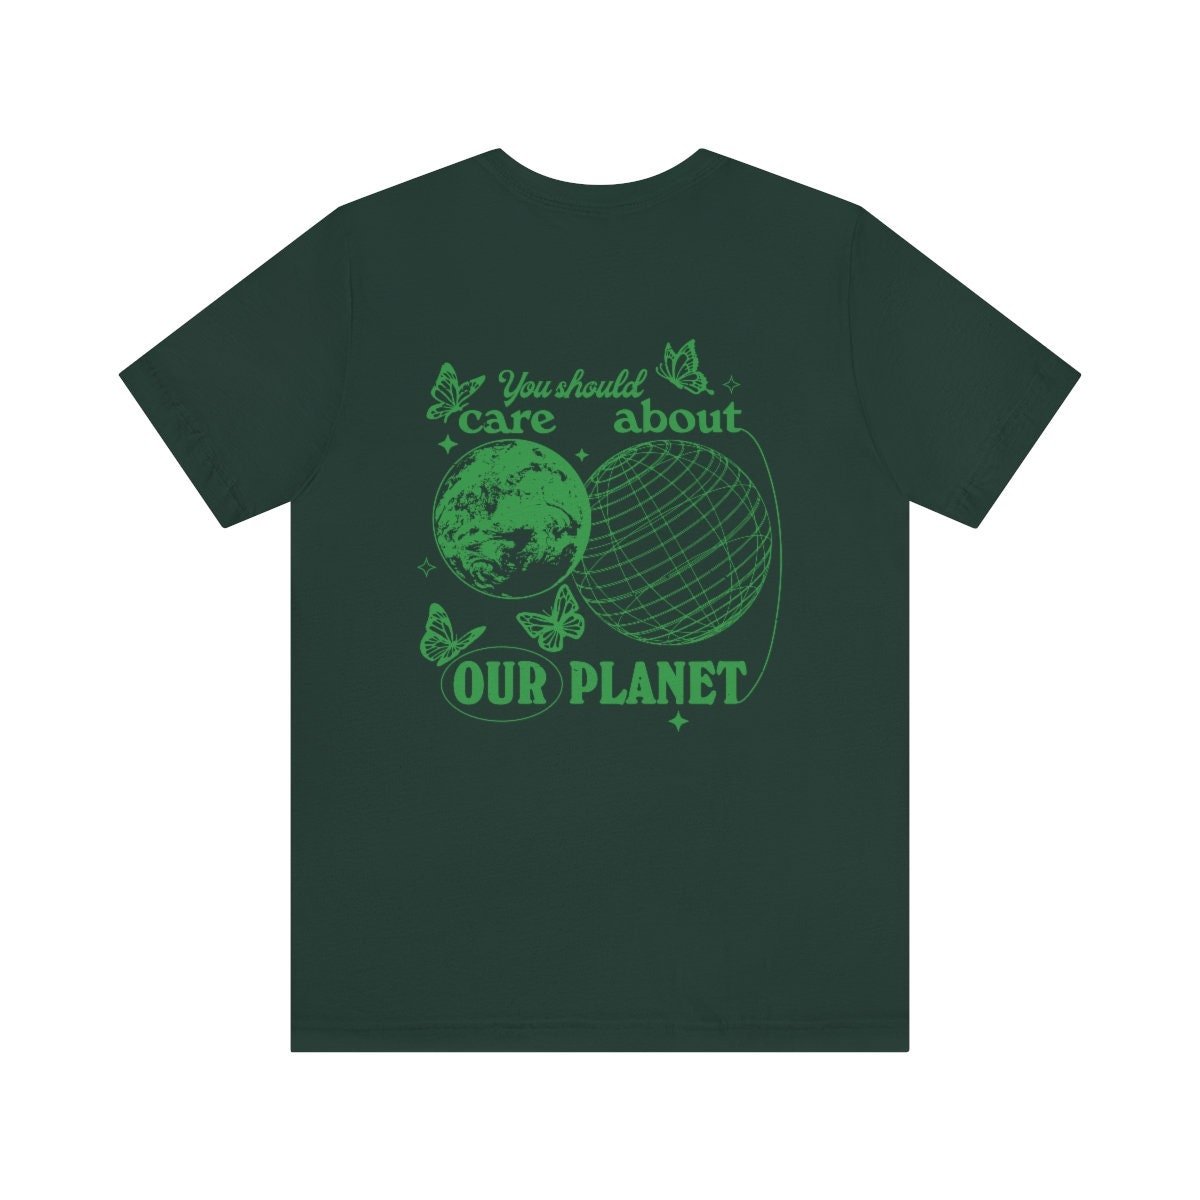 'Care About Our Planet' Environmental Tshirt - T-shirts - Kinder Planet Company